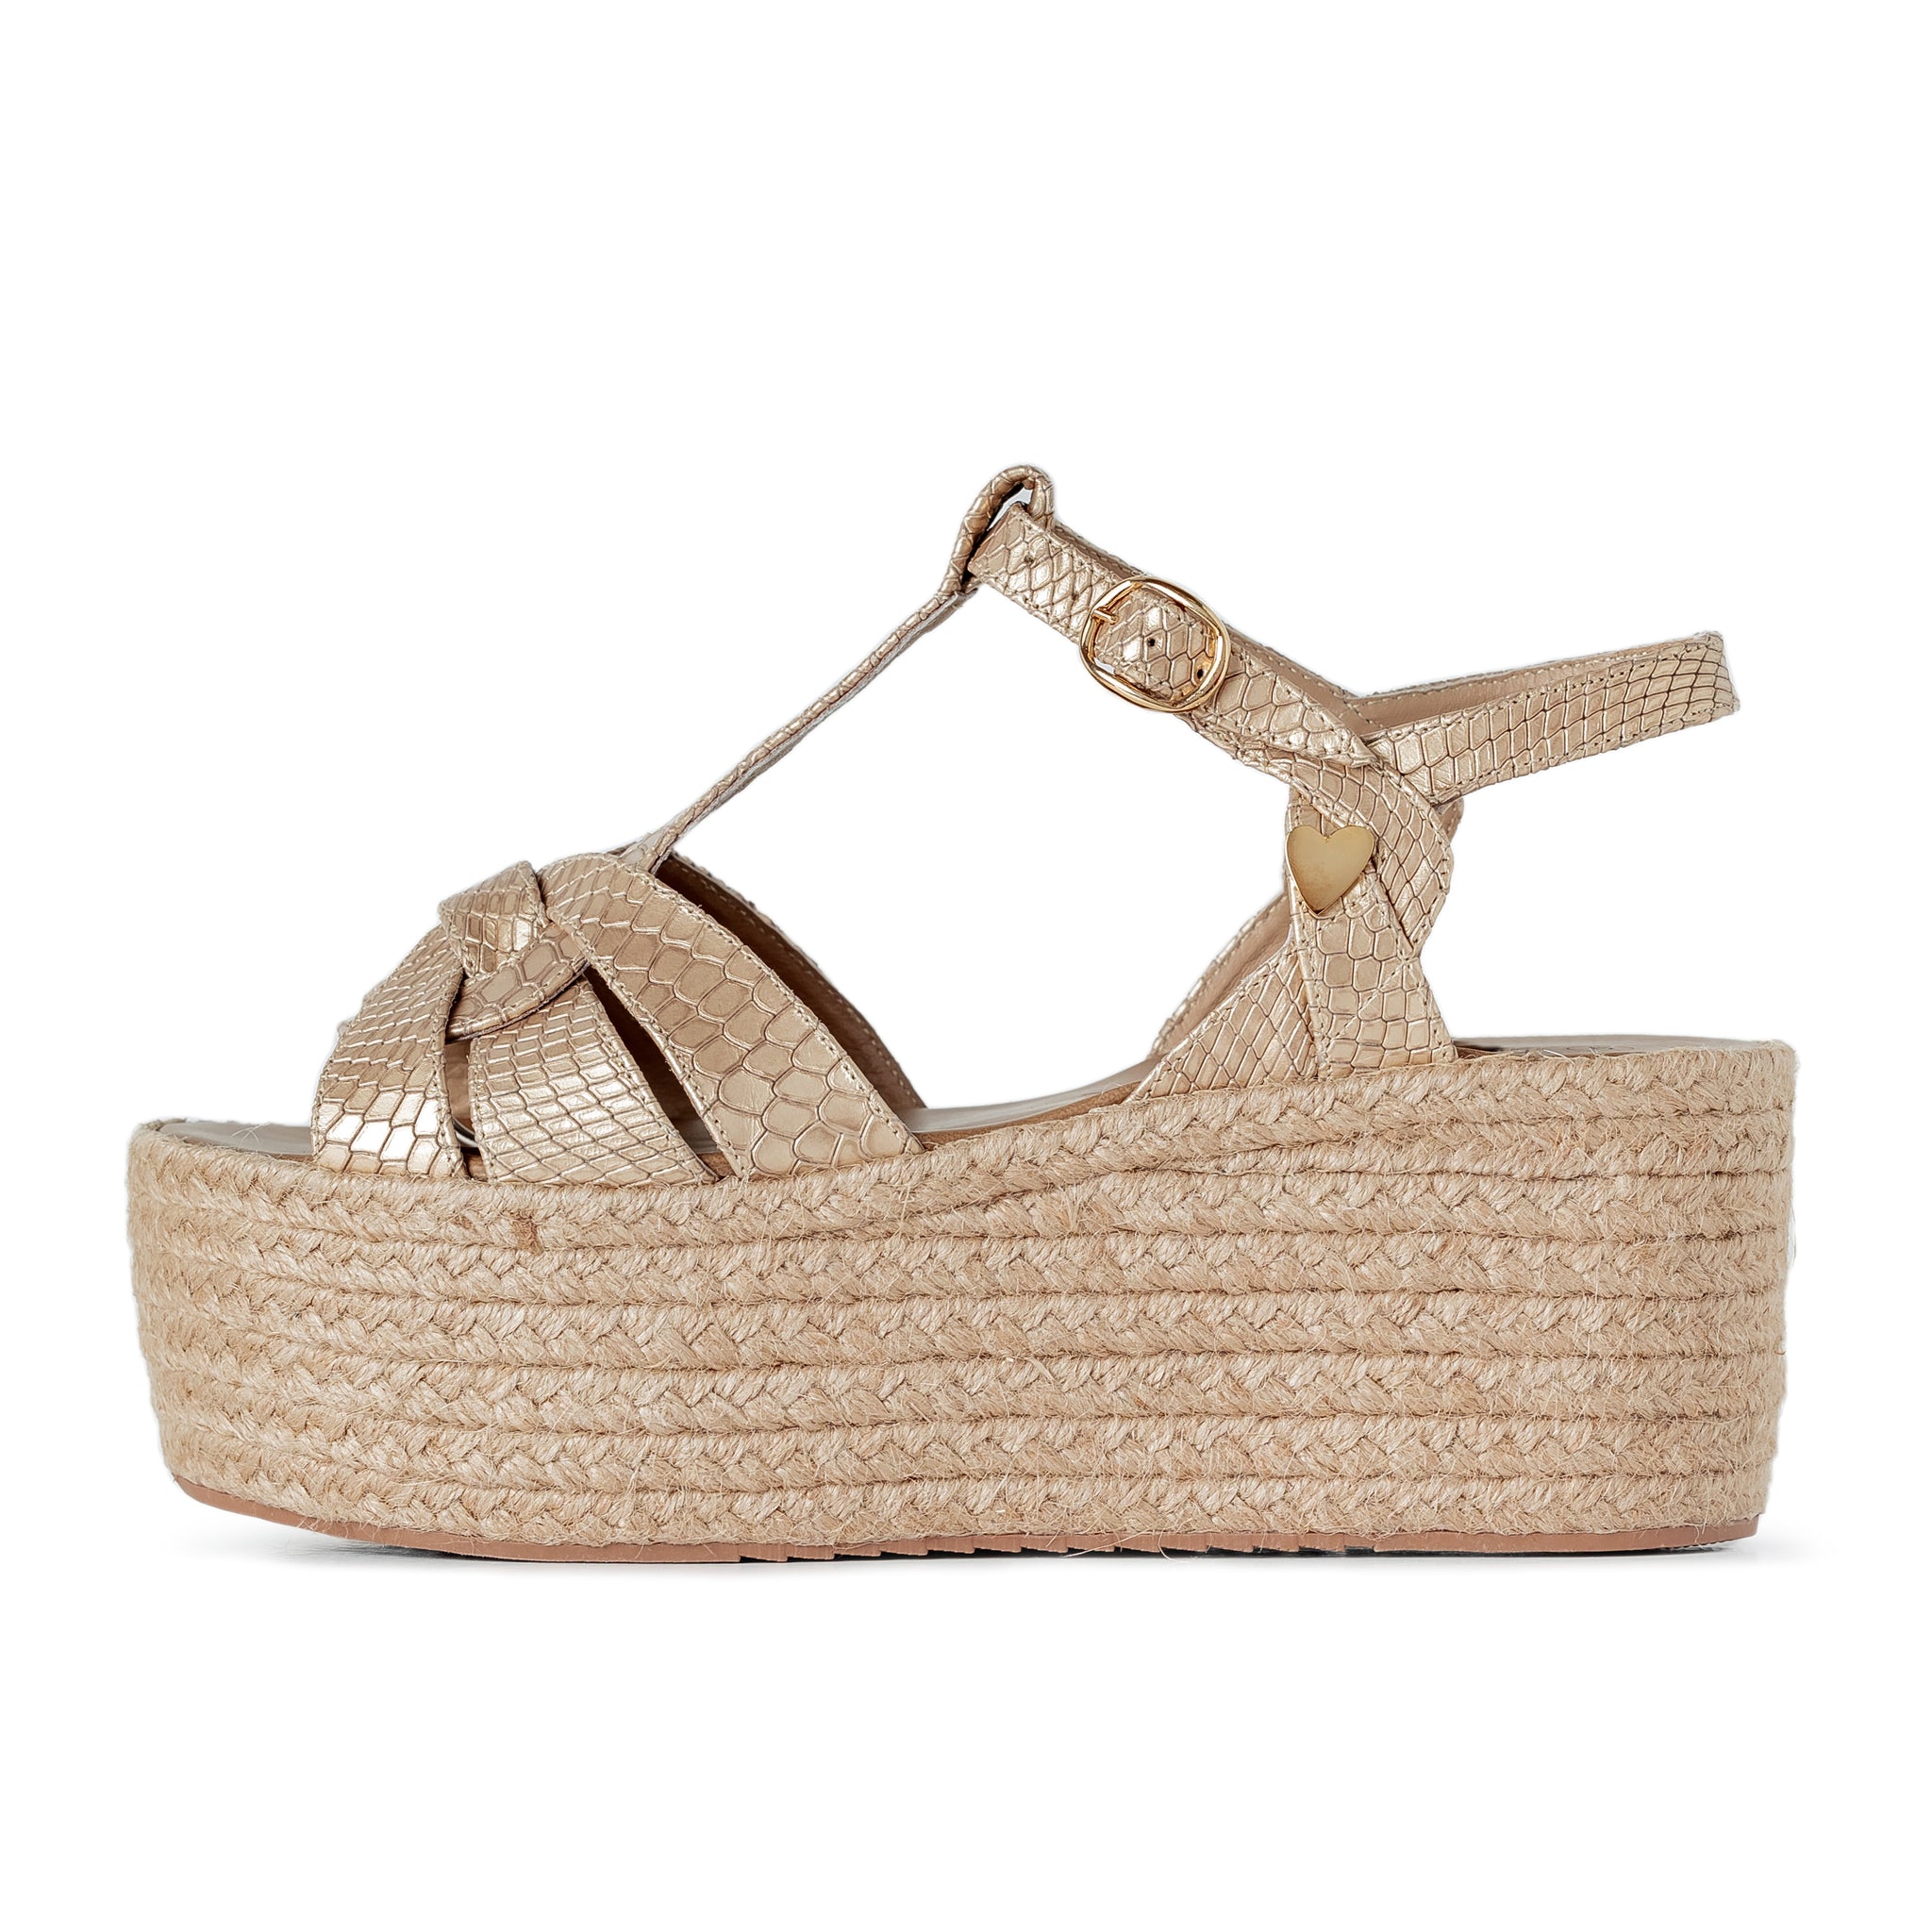 Get ready to rock your new CAMERON ESPADRILLES, just by adding a few inches and looking amazing and chic for your day!   FEATURES Its base is lined in natural jute Genuine Leather on the upper and back Insole made of genuine leather. Handmade 3 inch heel weight 2.5 inch platform